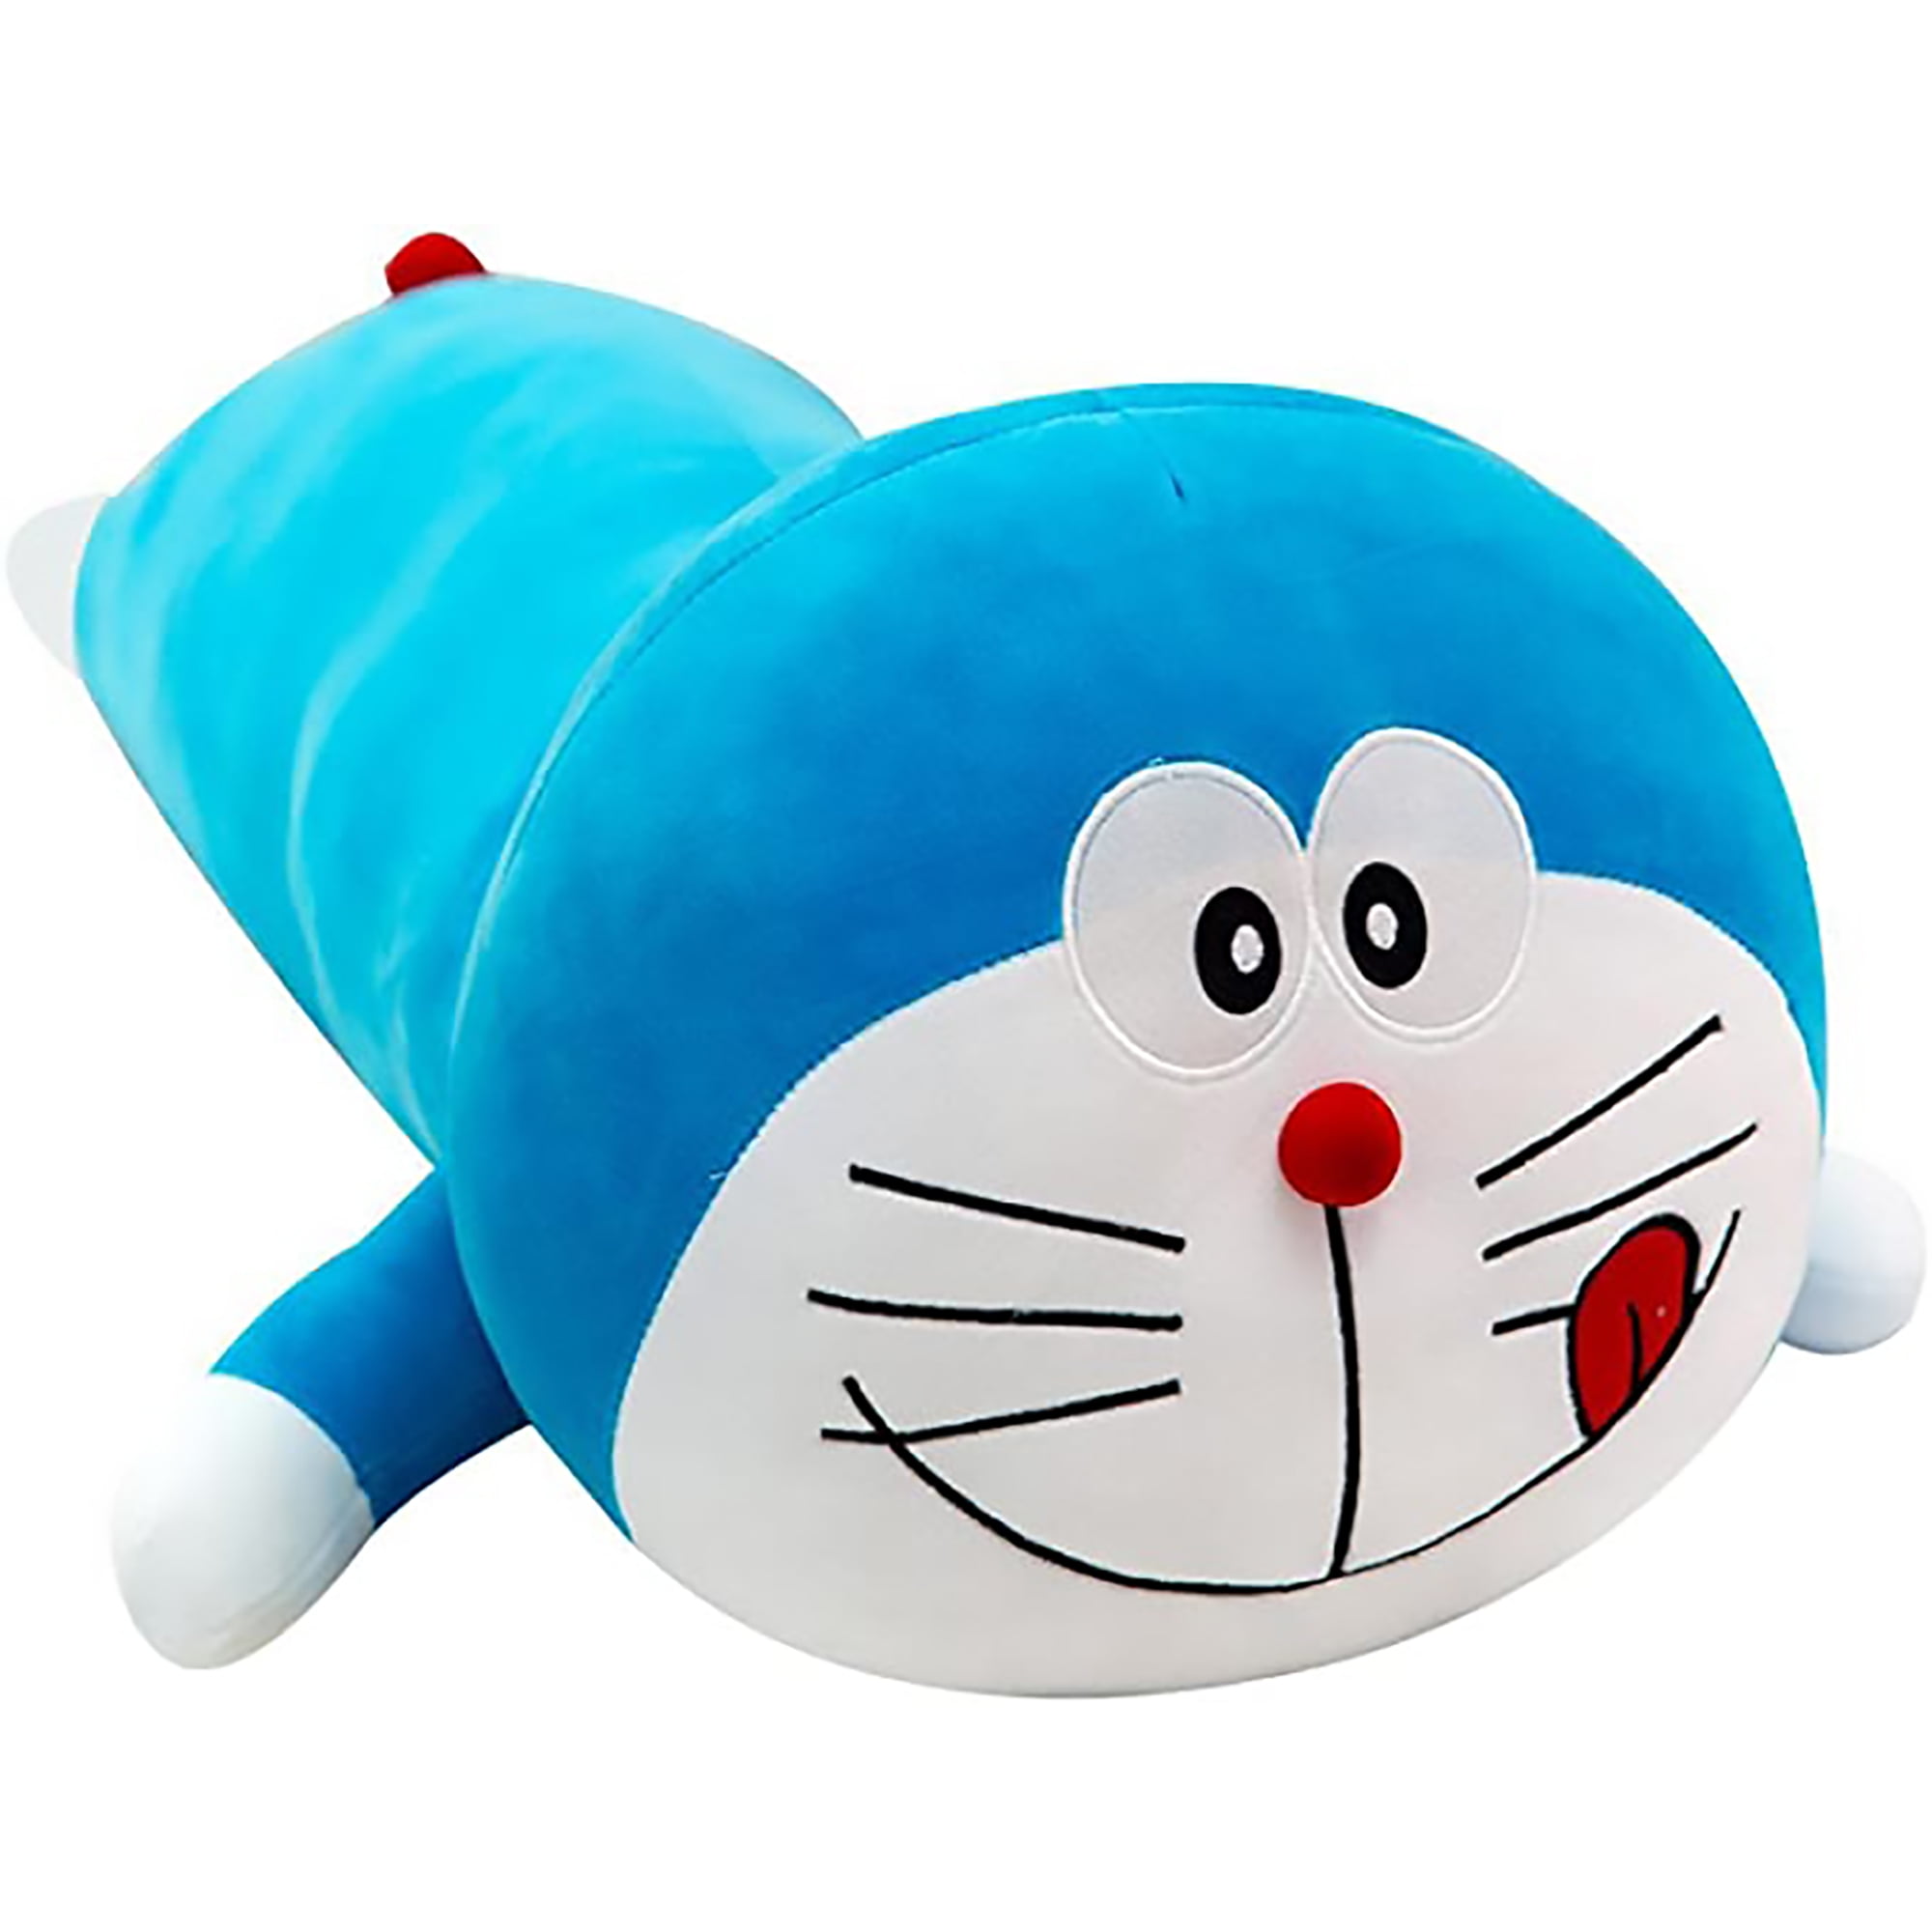 KLZO Lovely Doraemon Plush Toy Cushion Standing Next to me Filled Cartoon  Animation Doll Soft cat Animal Pillow Children's Girl Gift, 15 inches -  